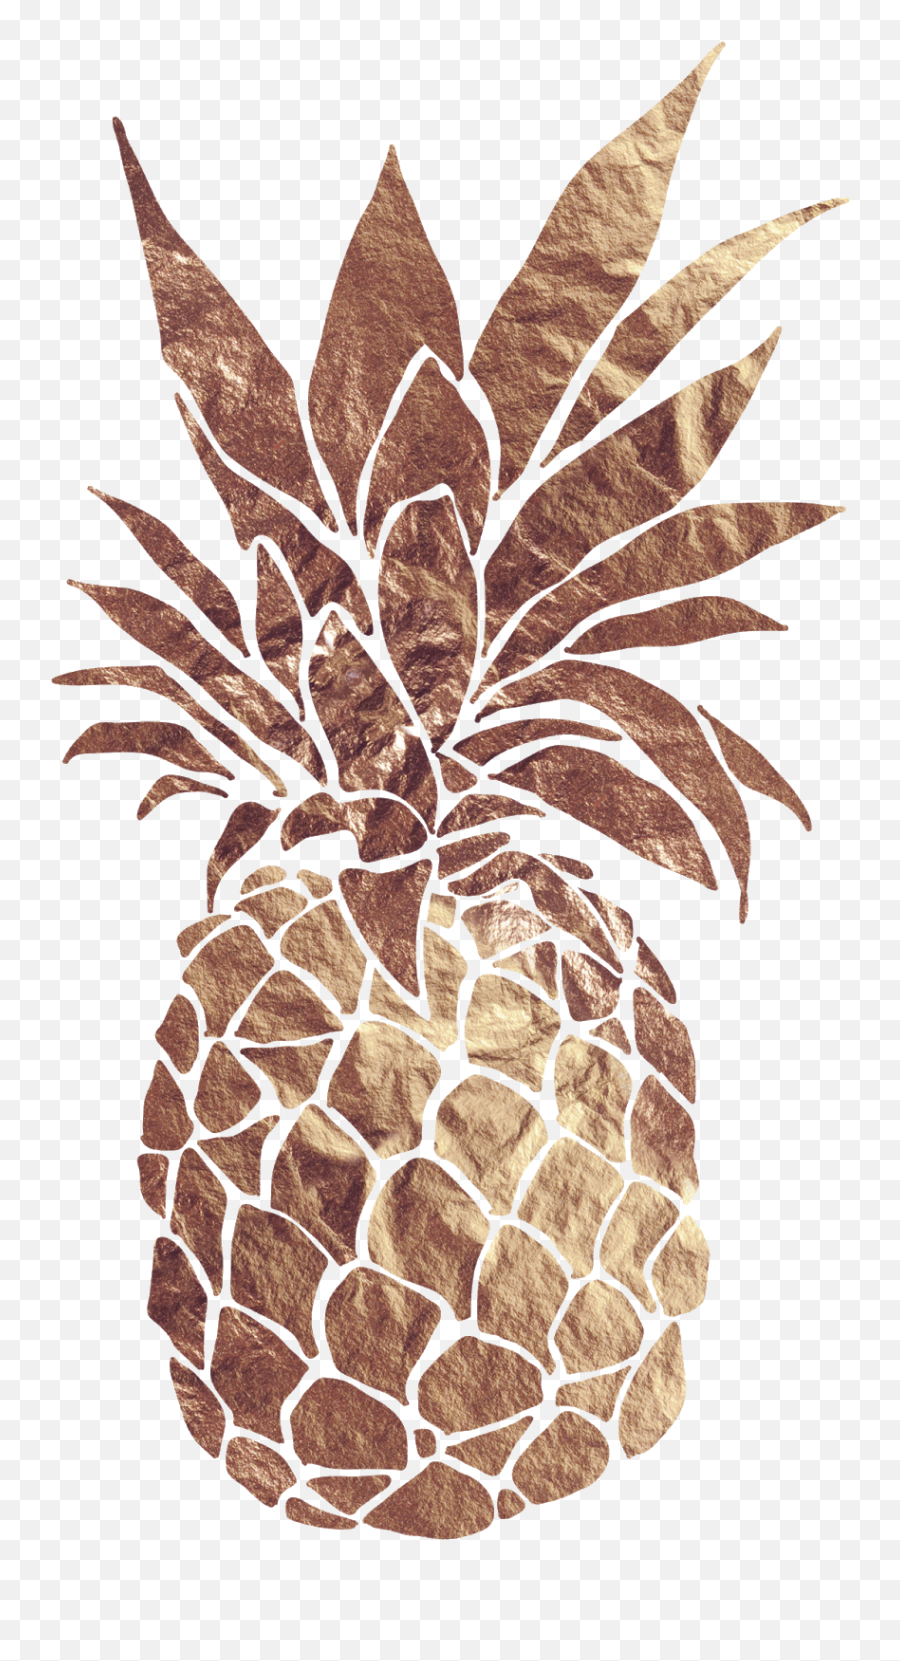 Download Pineapple Png Vector Clipart Image - Watercolour Black And White Printmaking,Pineapple Clipart Png